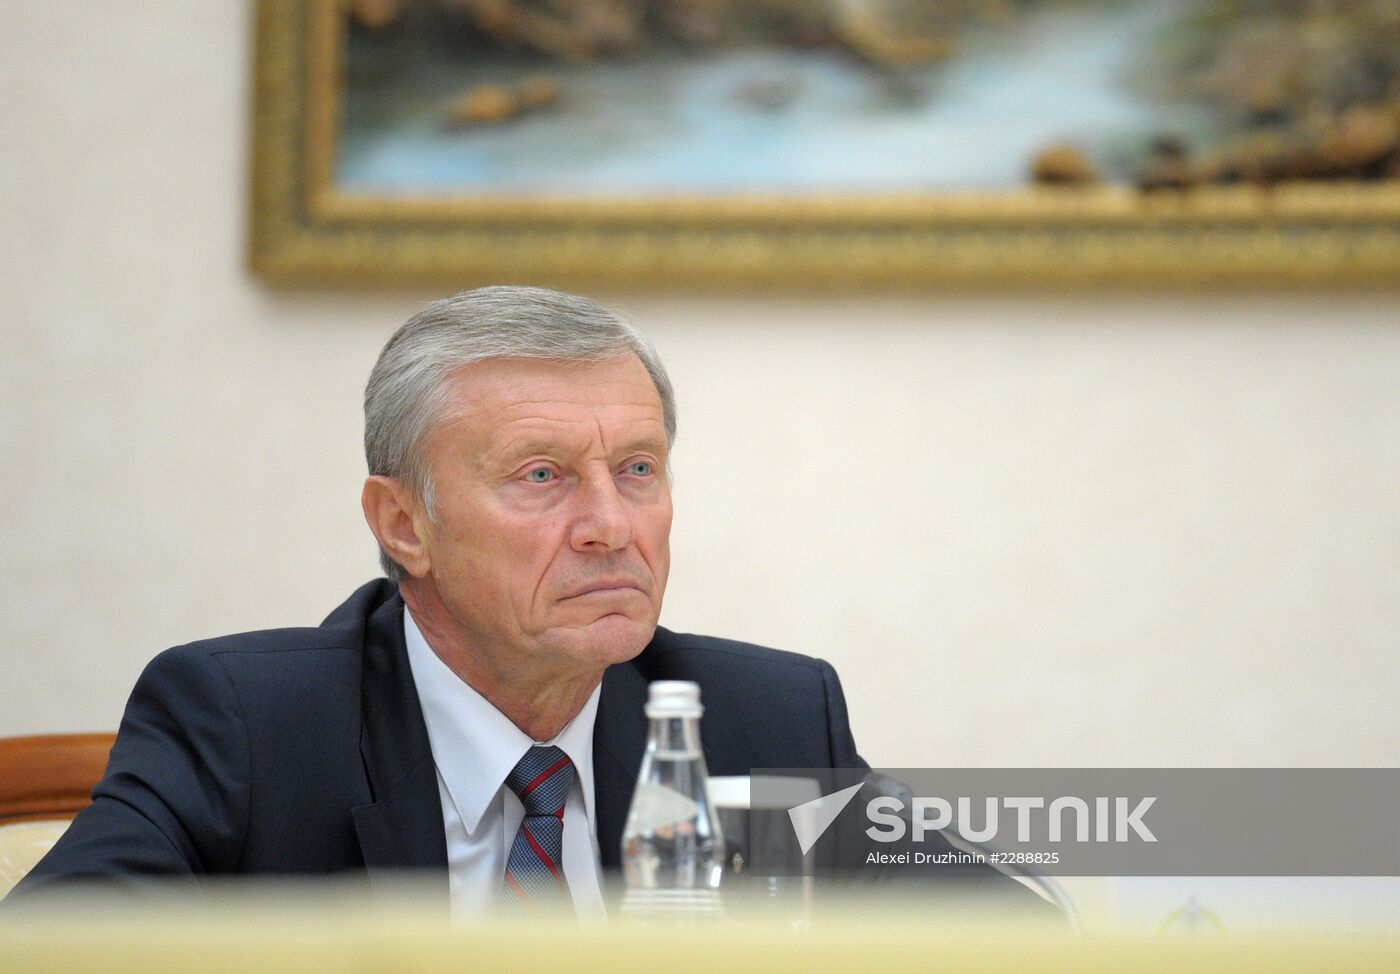 Meeting of CSTO's Collective Security Council